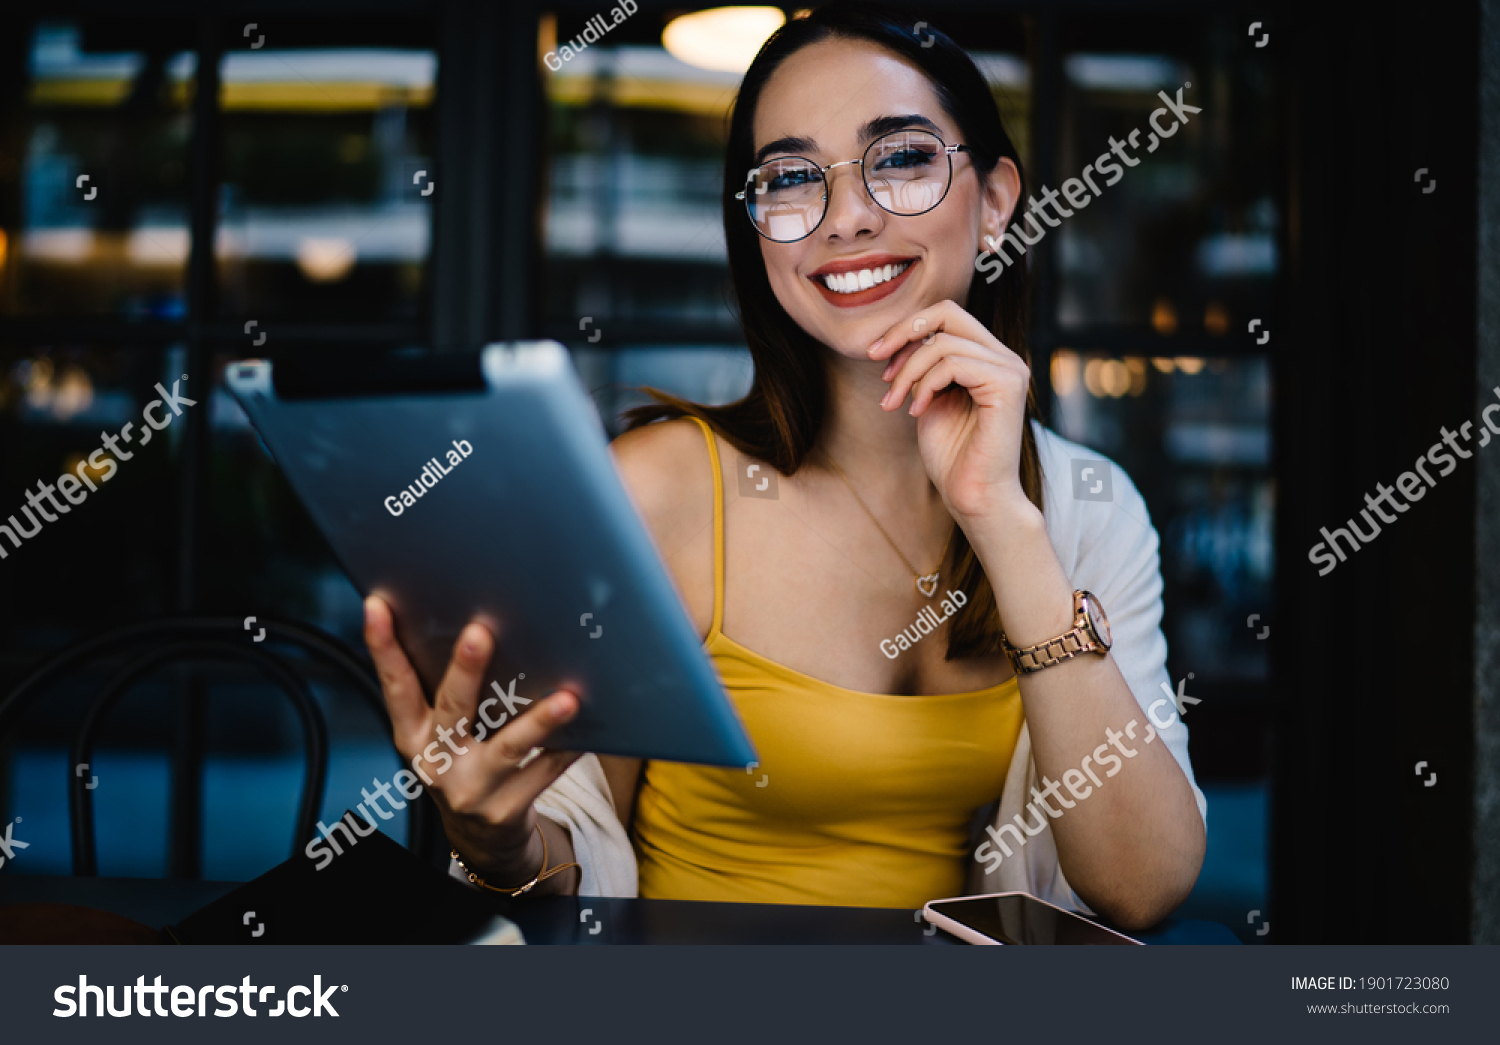 Portrait of cheerful Caucasian female blogger in eyewear smiling at camera during time for online networking via digital tablet, joyful hipster girl with modern touch pad posing in street cafe #1901723080